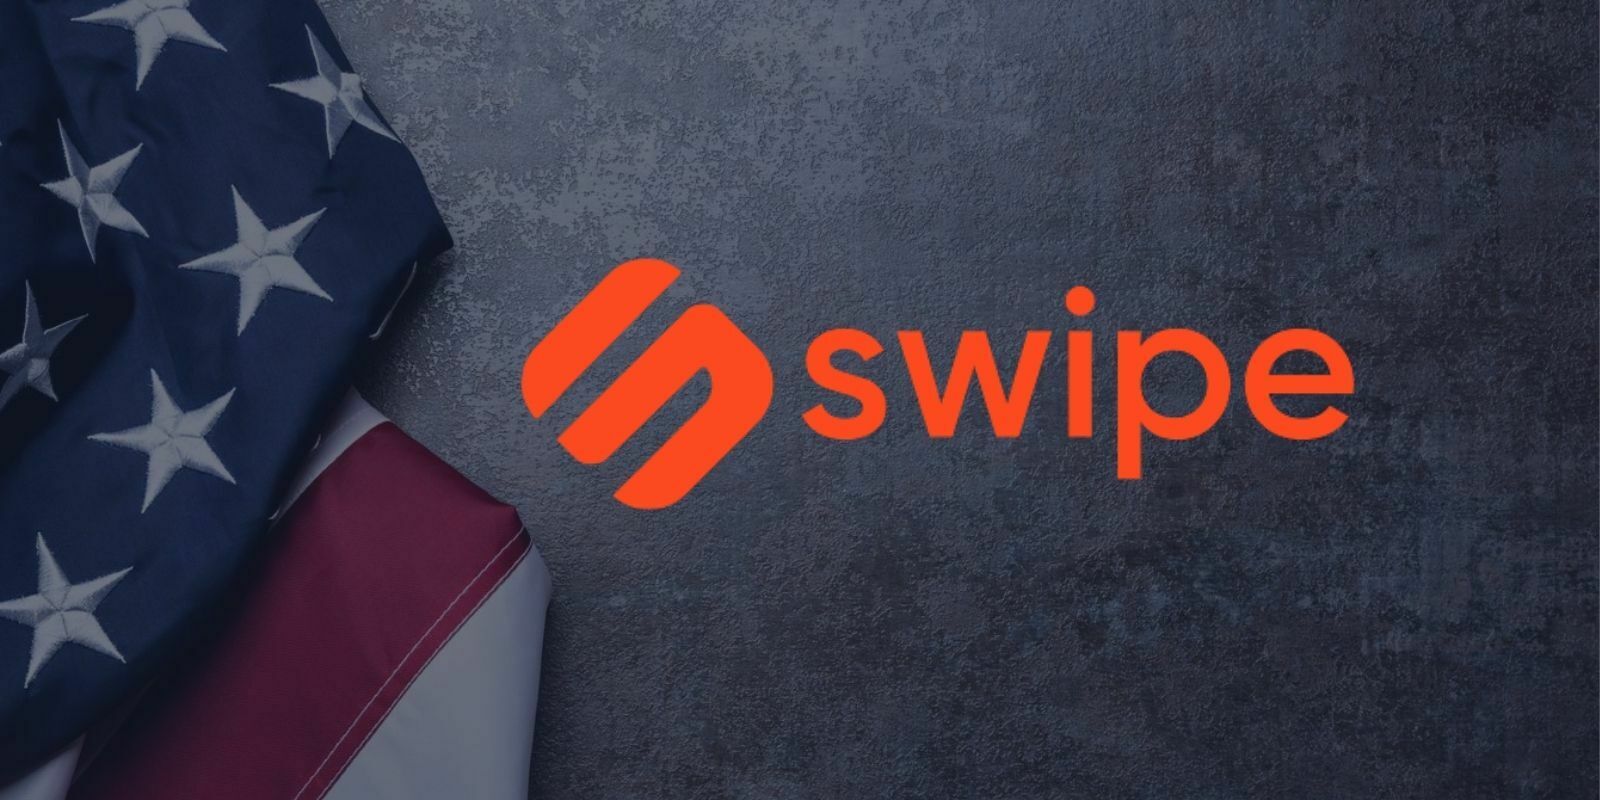 Swipe card crypto security issues in blockchain technology